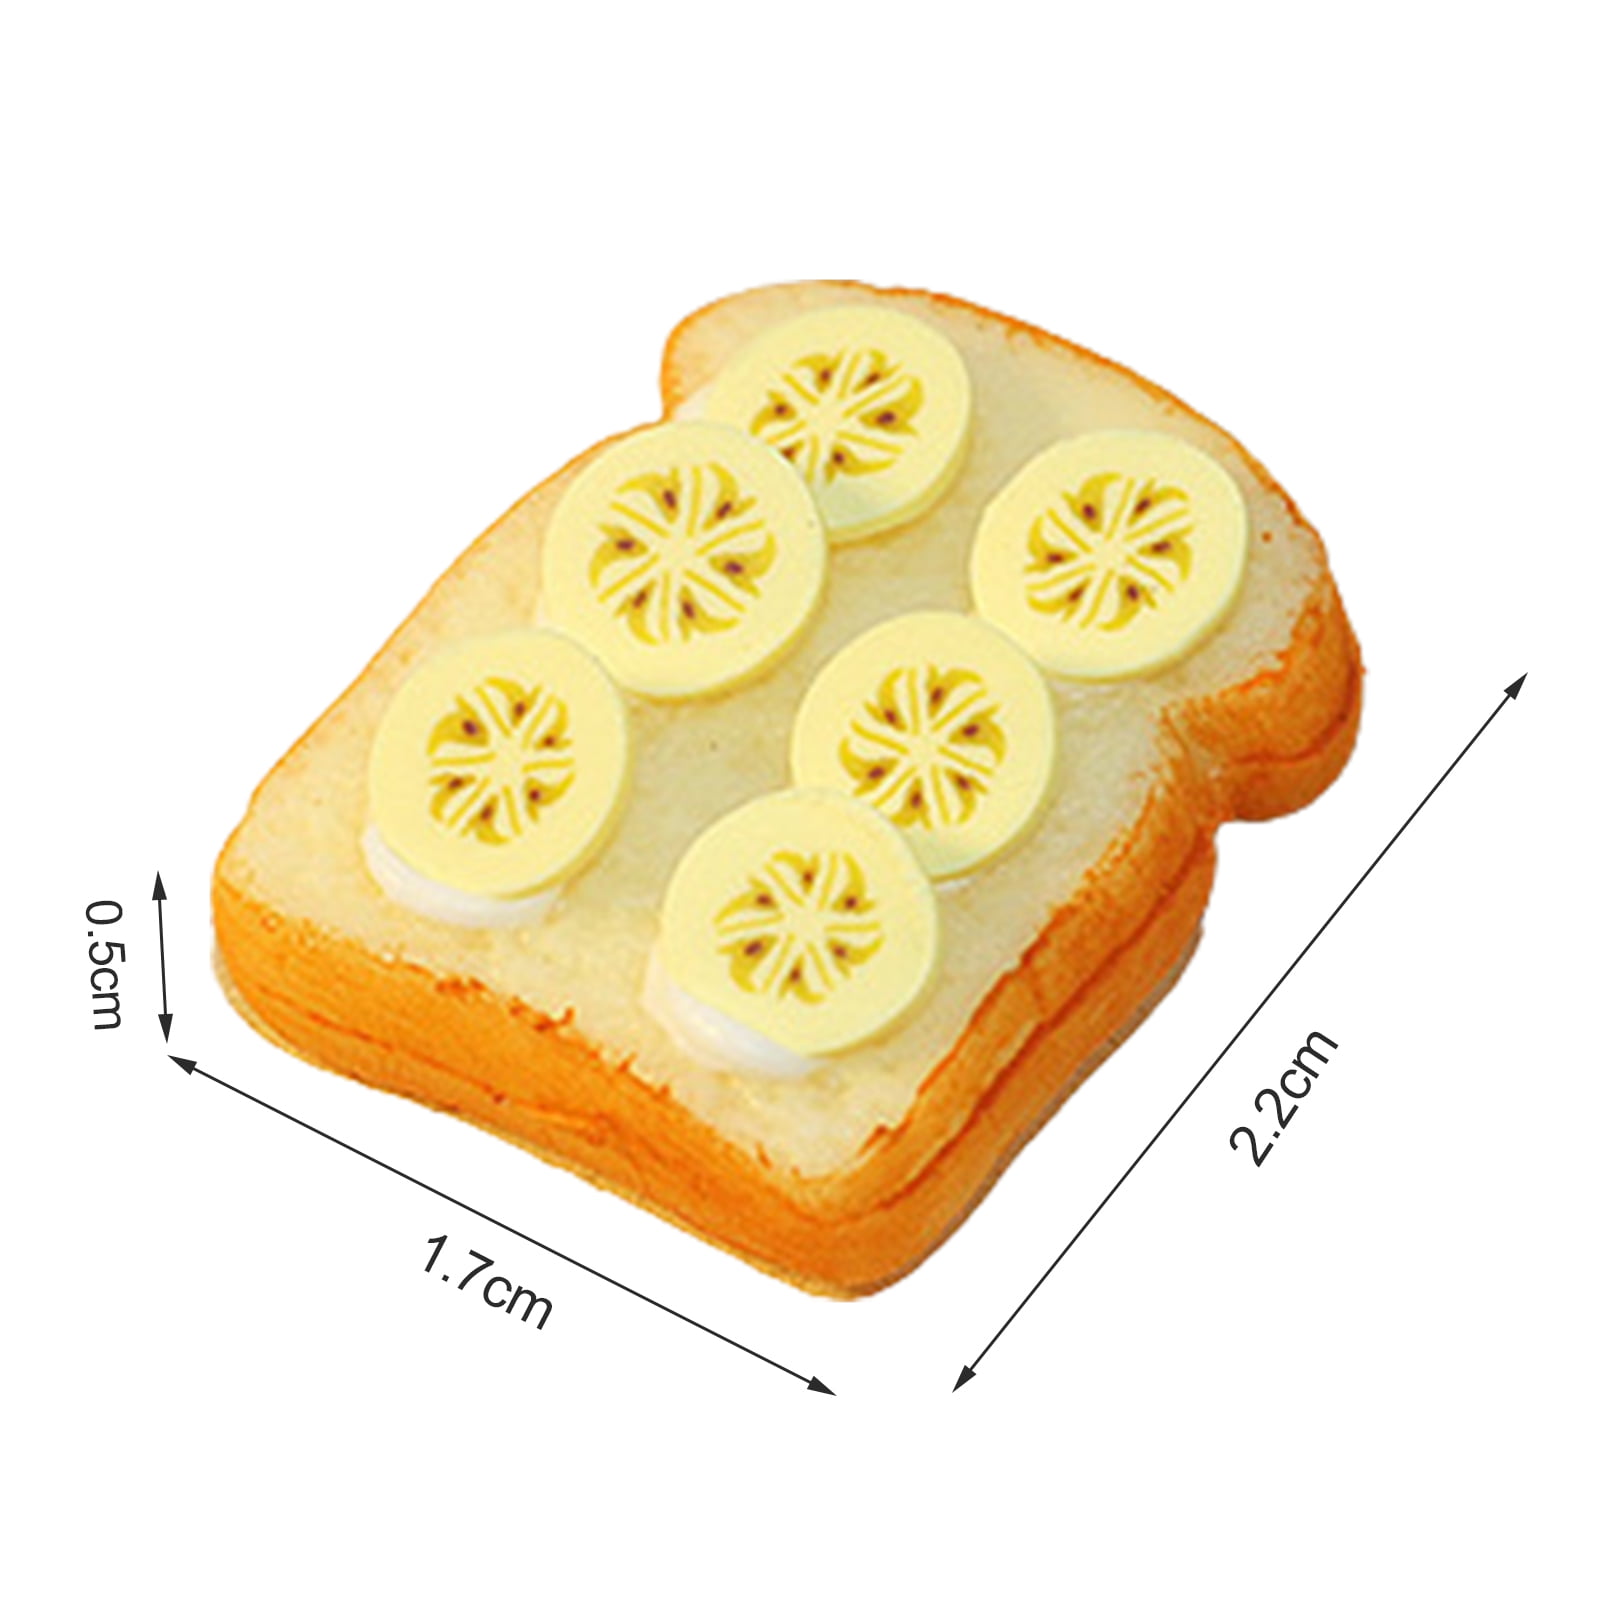 Details about   Miniature Kitchen Food Cream Cake Model for 1/12 Scale Dolls House Multi-color